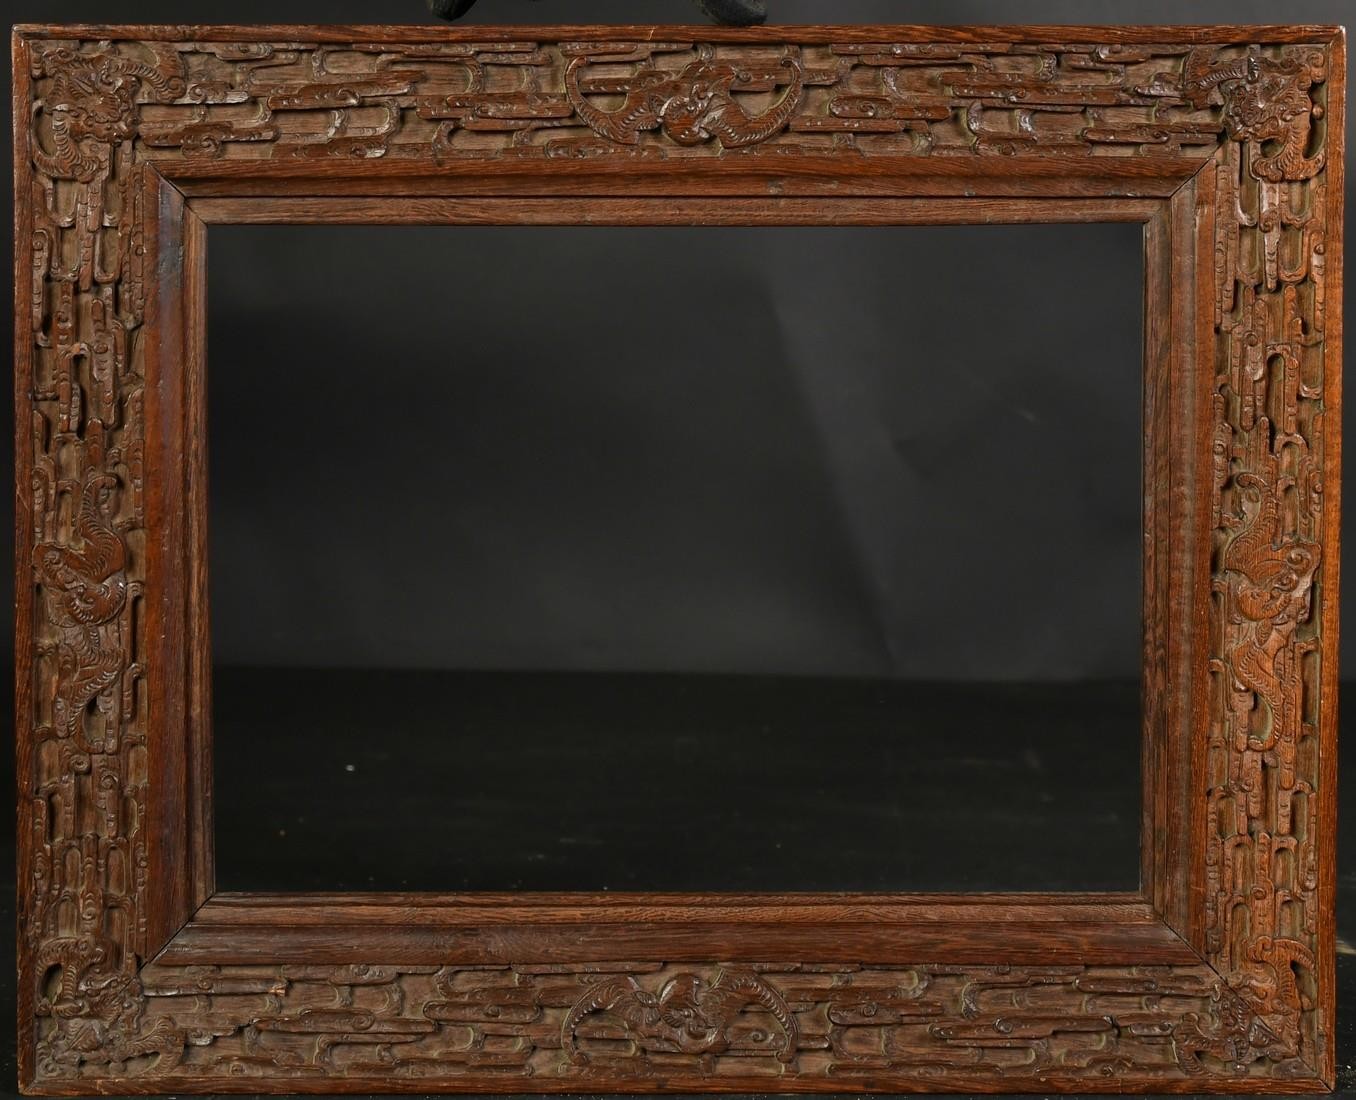 AN EARLY 20TH CENTURY CHINESE HARDWOOD FRAME, carved in an intricate design with bats and dragons, - Image 2 of 4